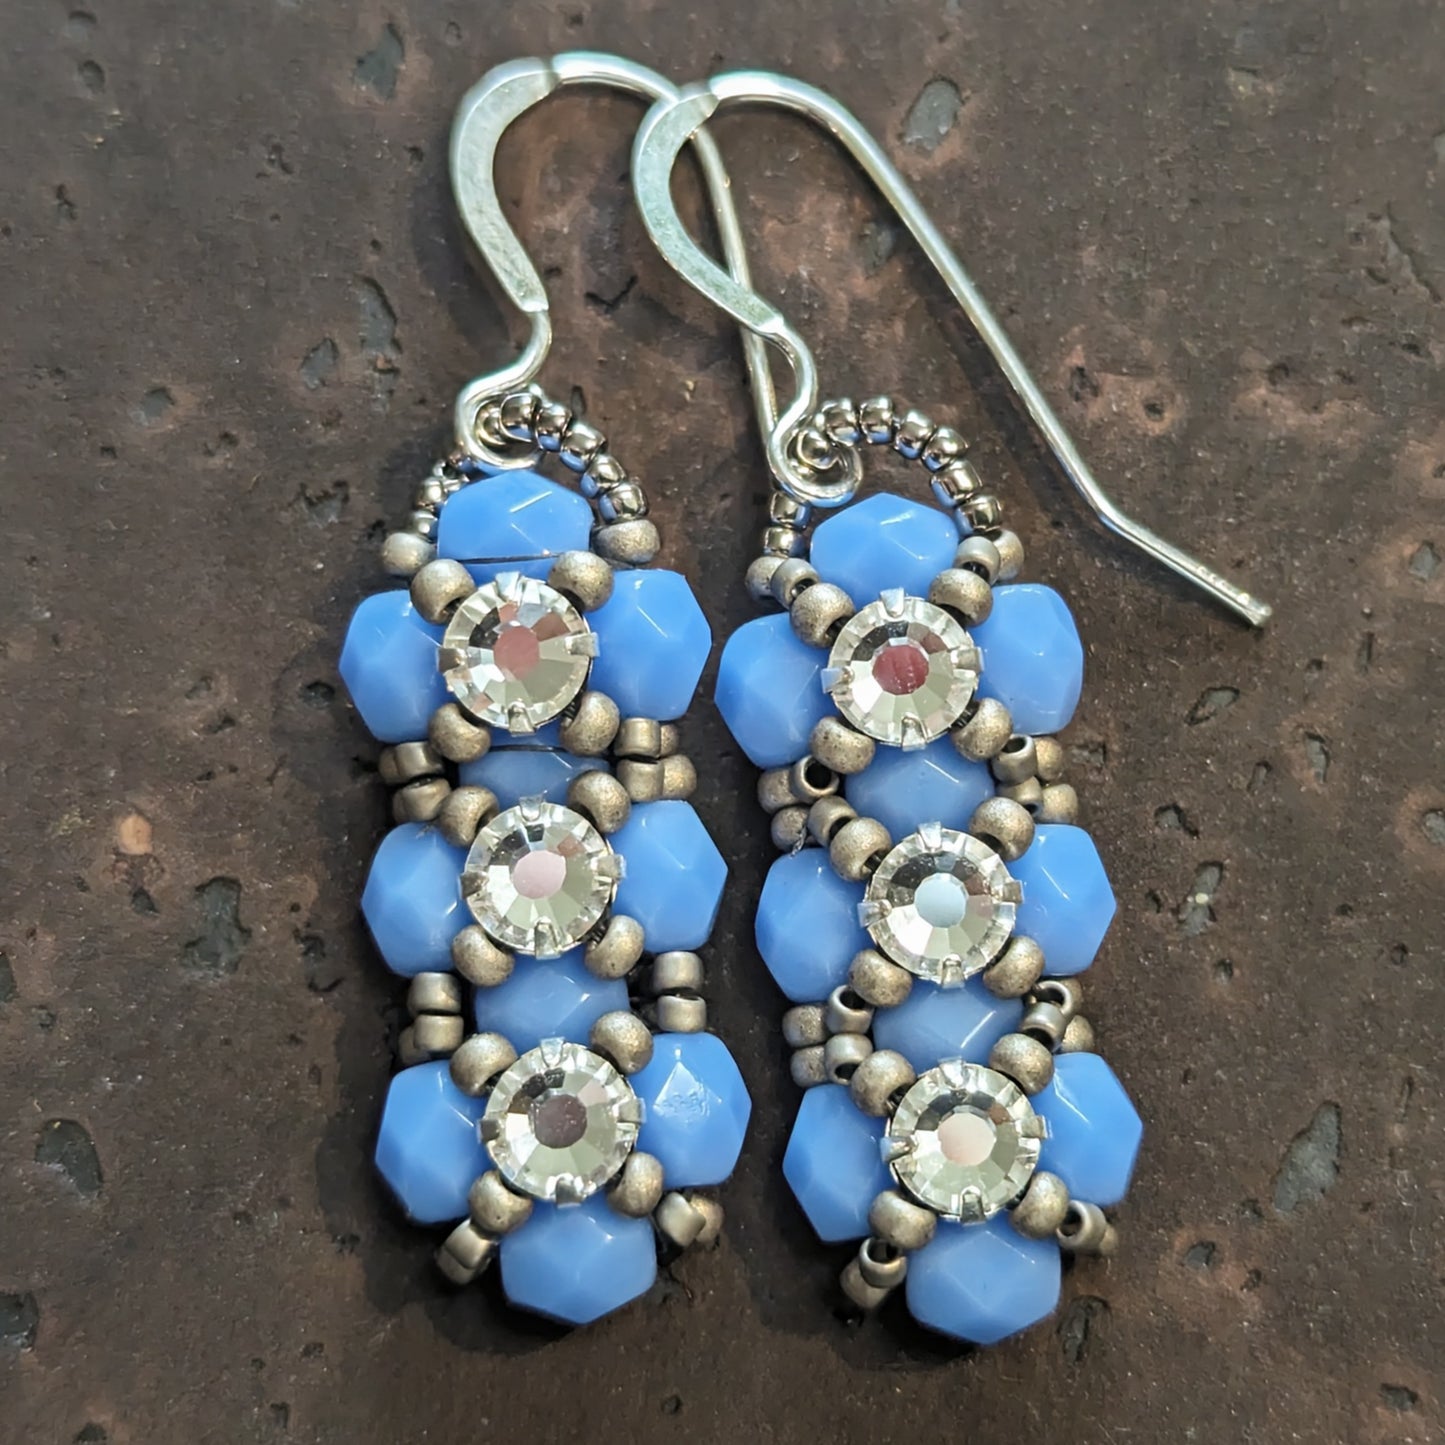 Silver and opaque pale periwinkle blue earrings on a cork-like dark brown background. The earrings have a background of light periwinkle blue and there are matte silver seed beads in x-shape securing three clear rhinestones in a vertical row. The earrings have silver ear wires.